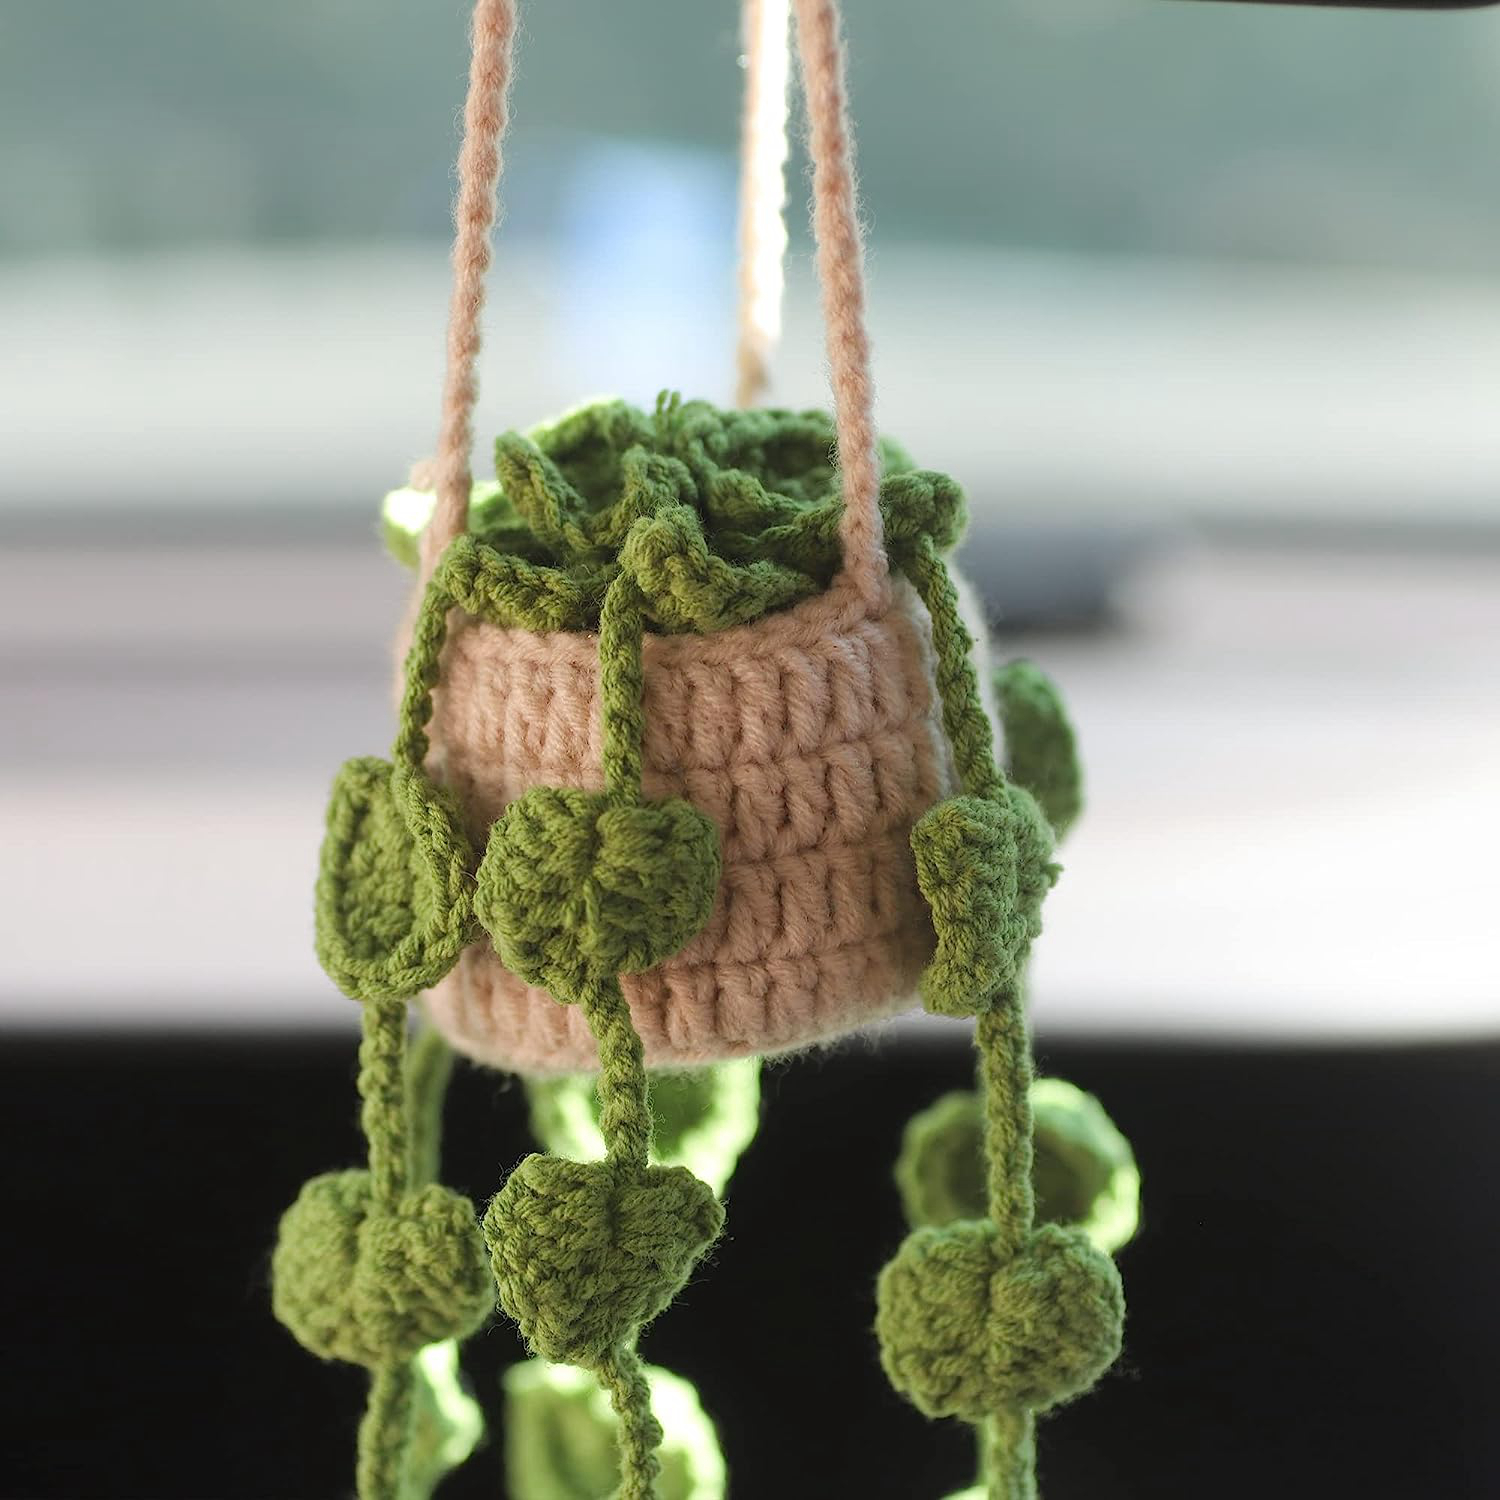 Car Accessories for Women,Crochet Car Accessories,Car Mirror Hanging  Accessories, Car Decorations,Car Accessories Interior Aesthetic Hand-Woven  Potted